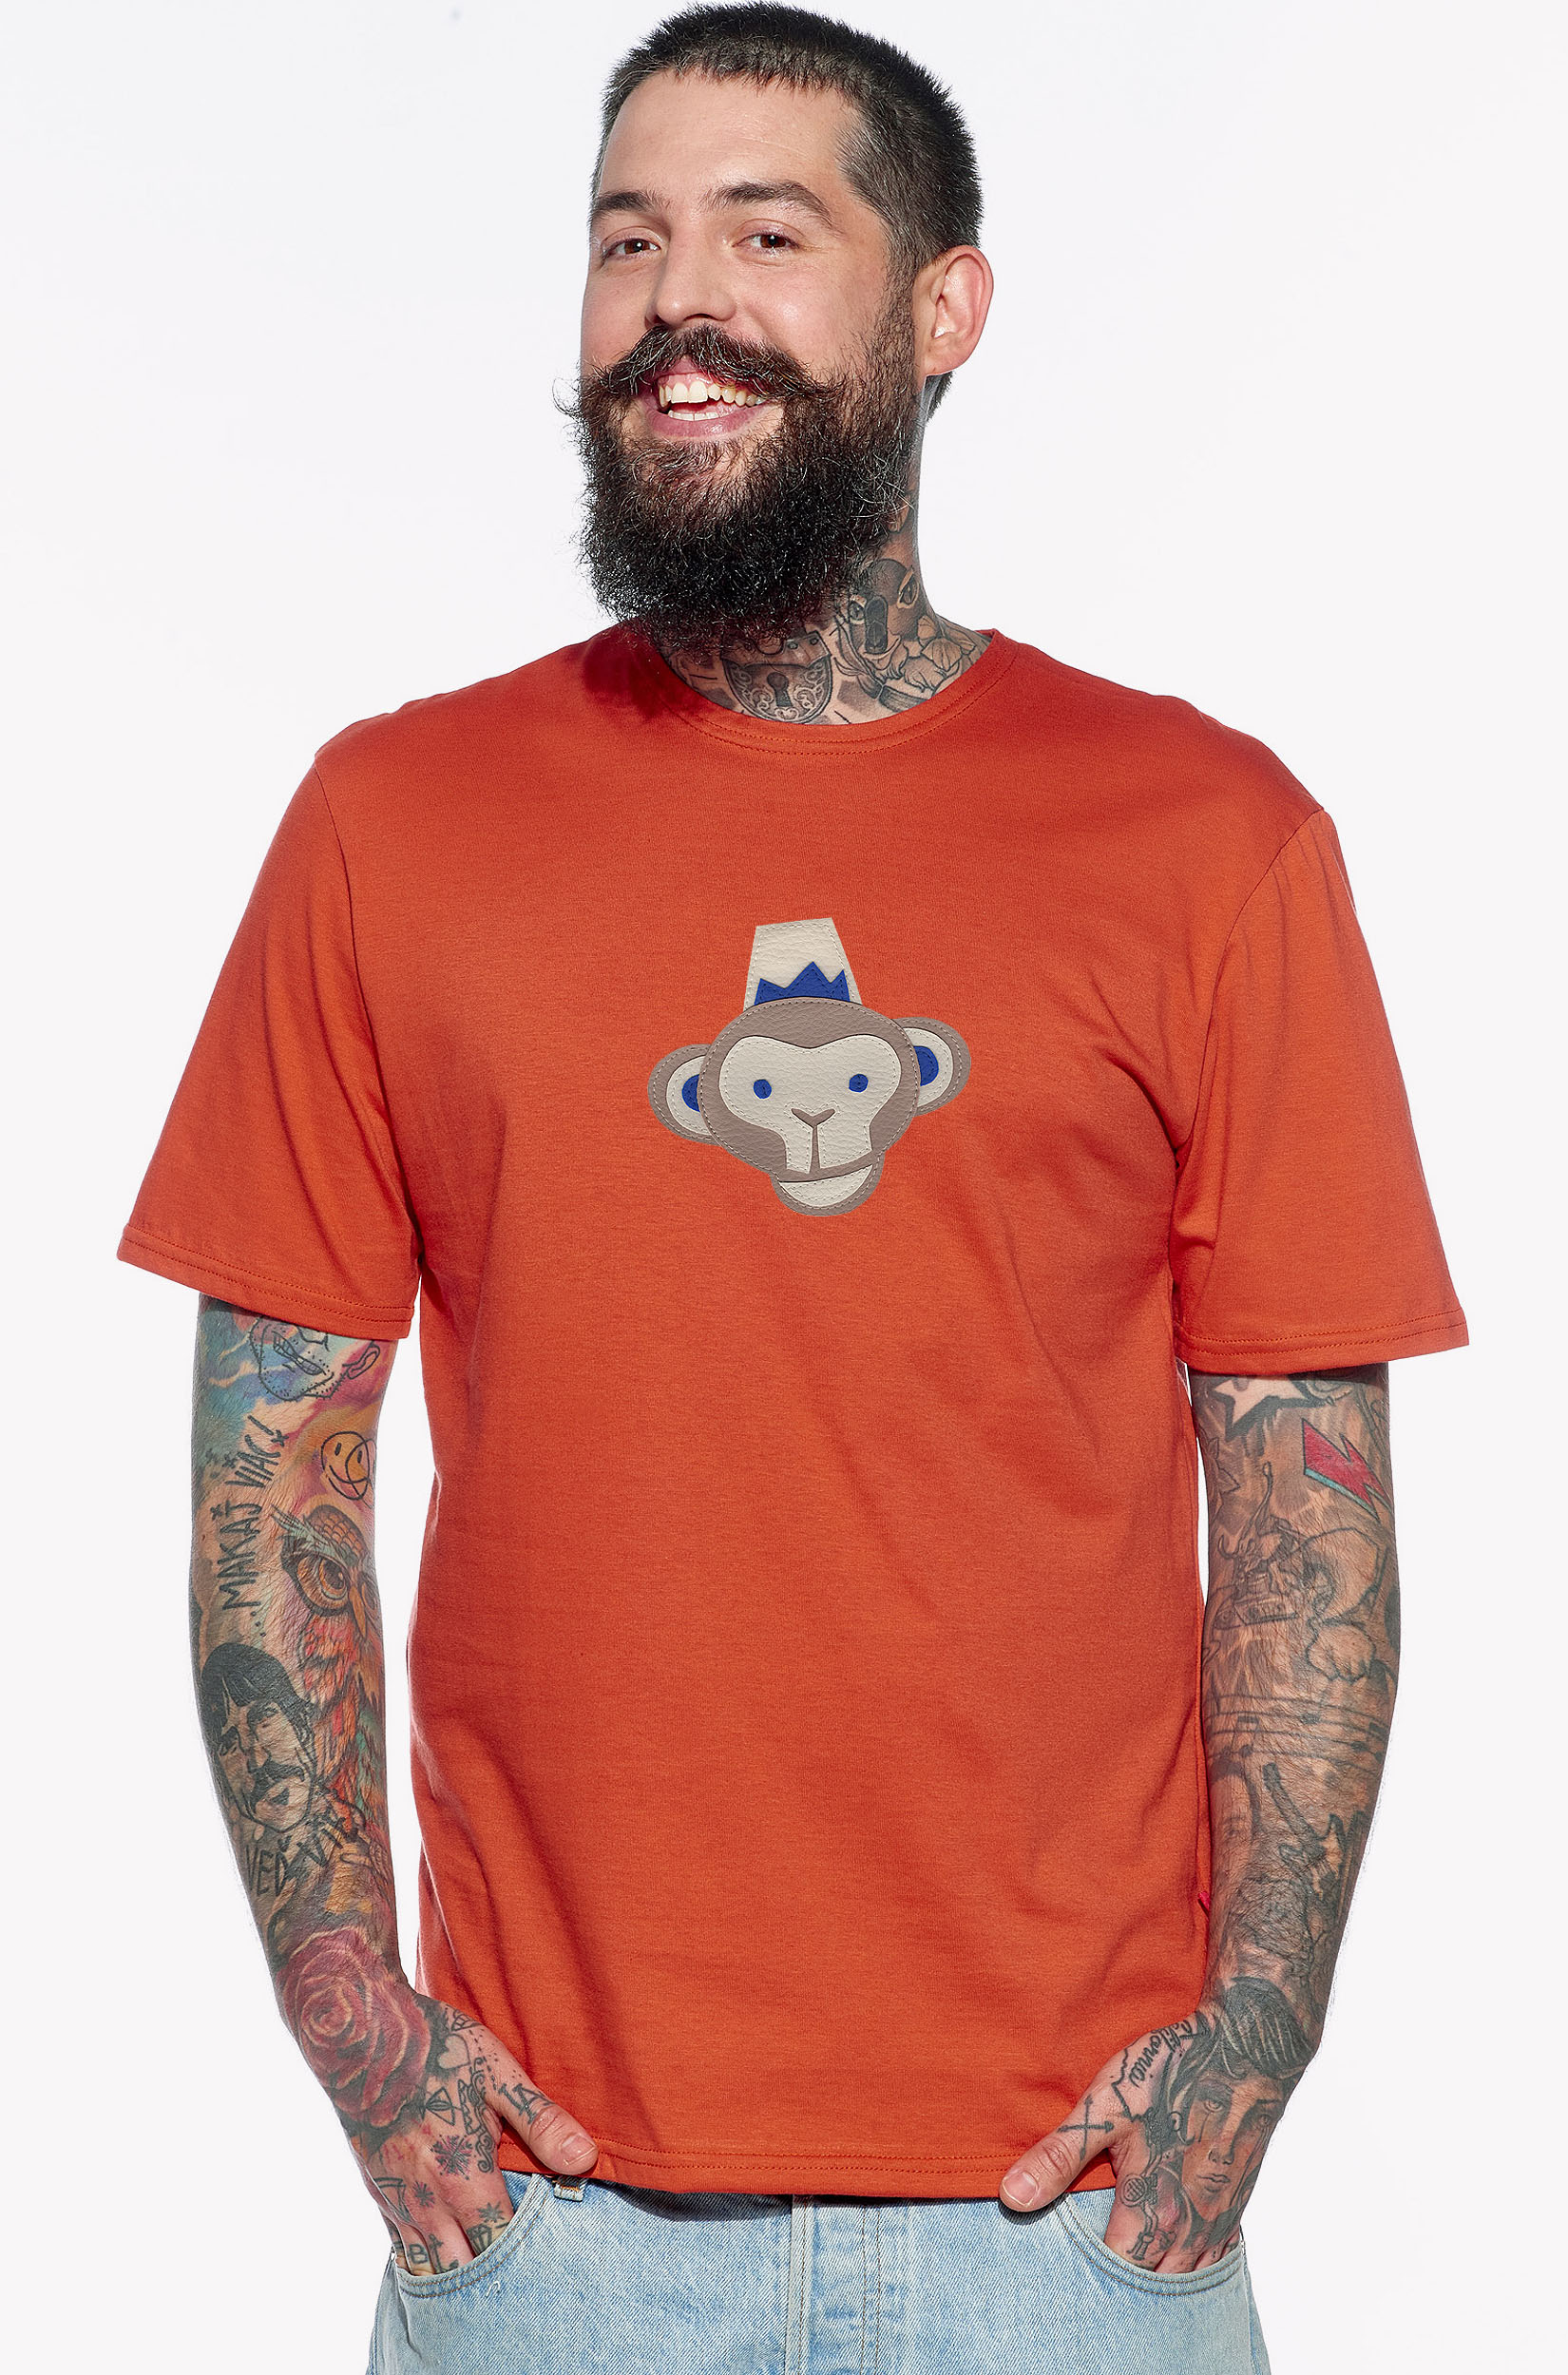 Shirt with a monkey